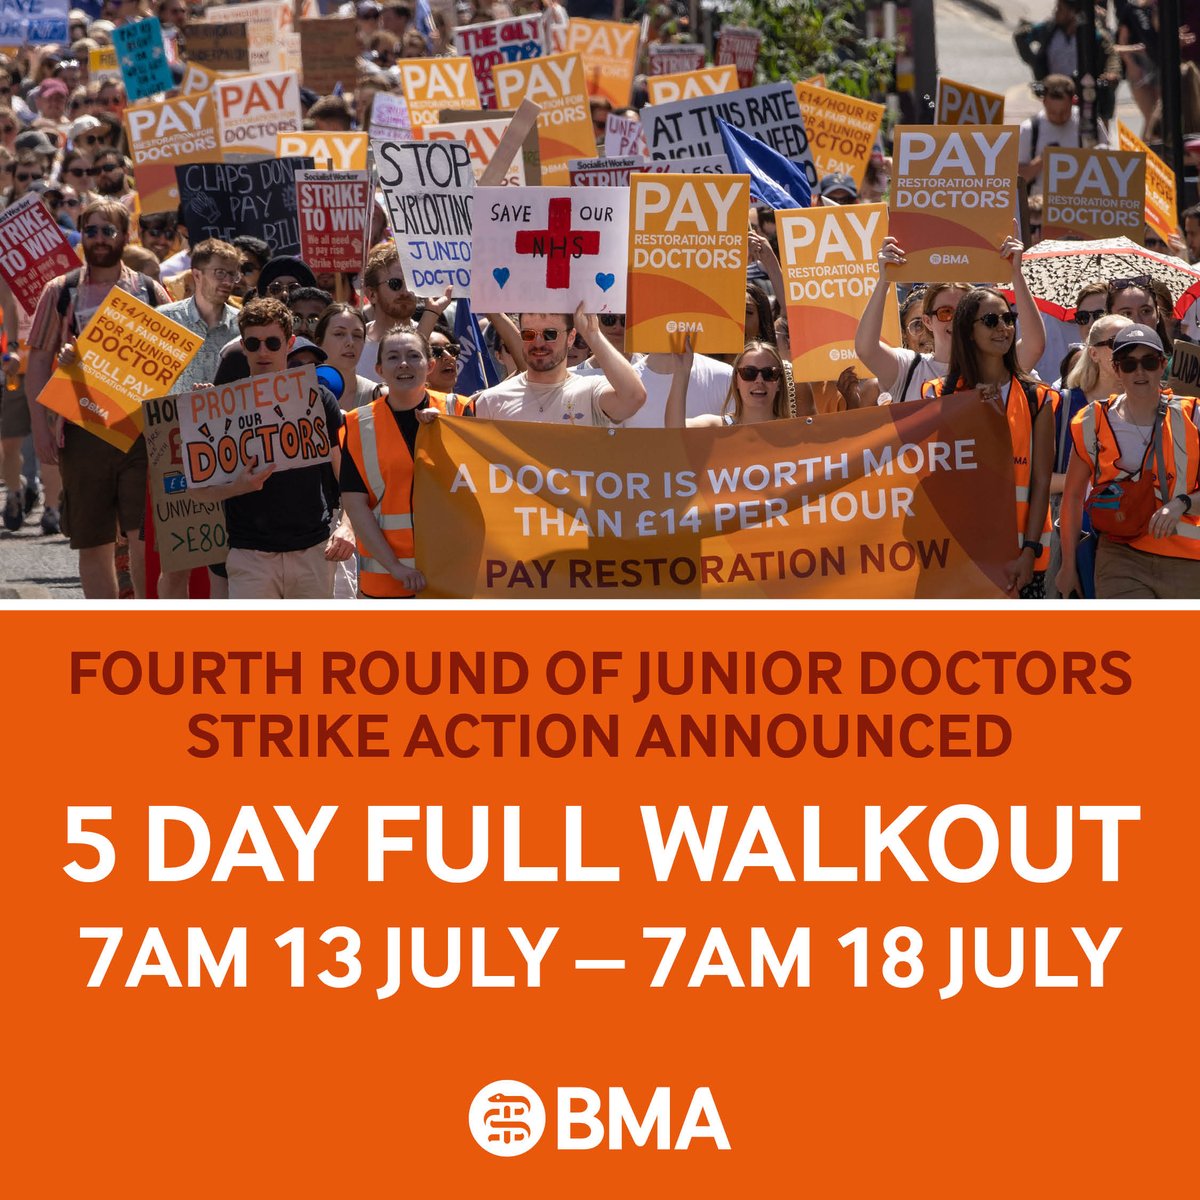 We won’t give up until junior doctors are fairly paid.

On 13 July, we will stage a 5 day strike, the longest single walkout by doctors in the NHS’s history.